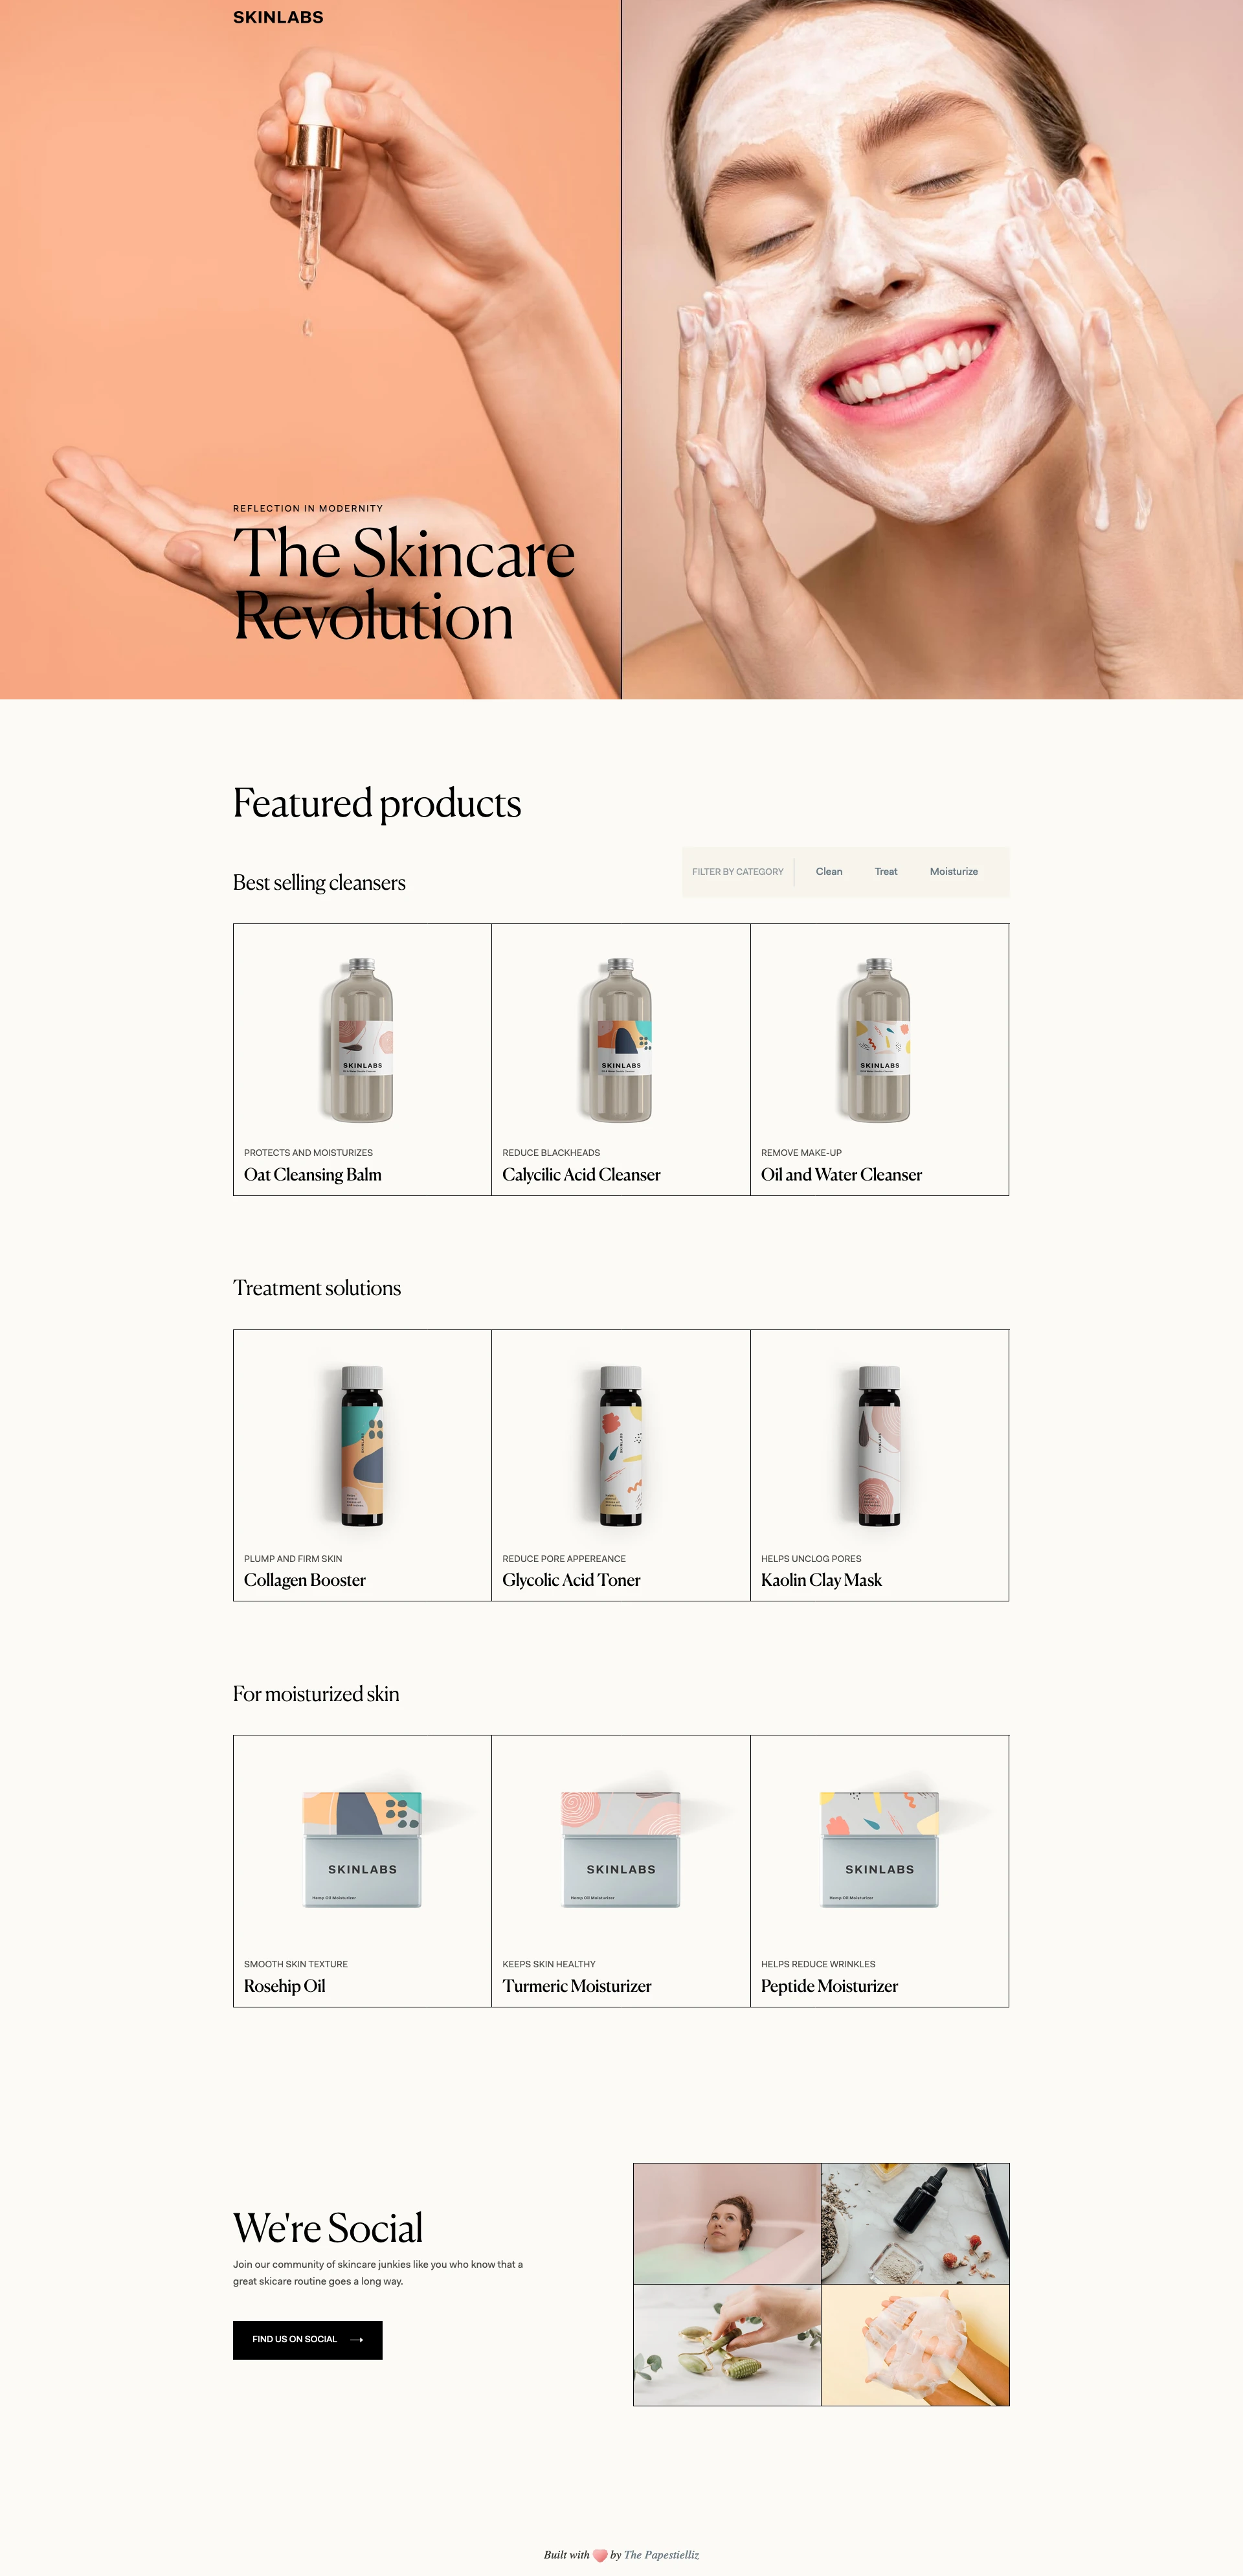 SkinLabs - Free Webflow Template - Free webflow e-commerce template with a modern design, responsive layout and all the features you need to create an awesome store.